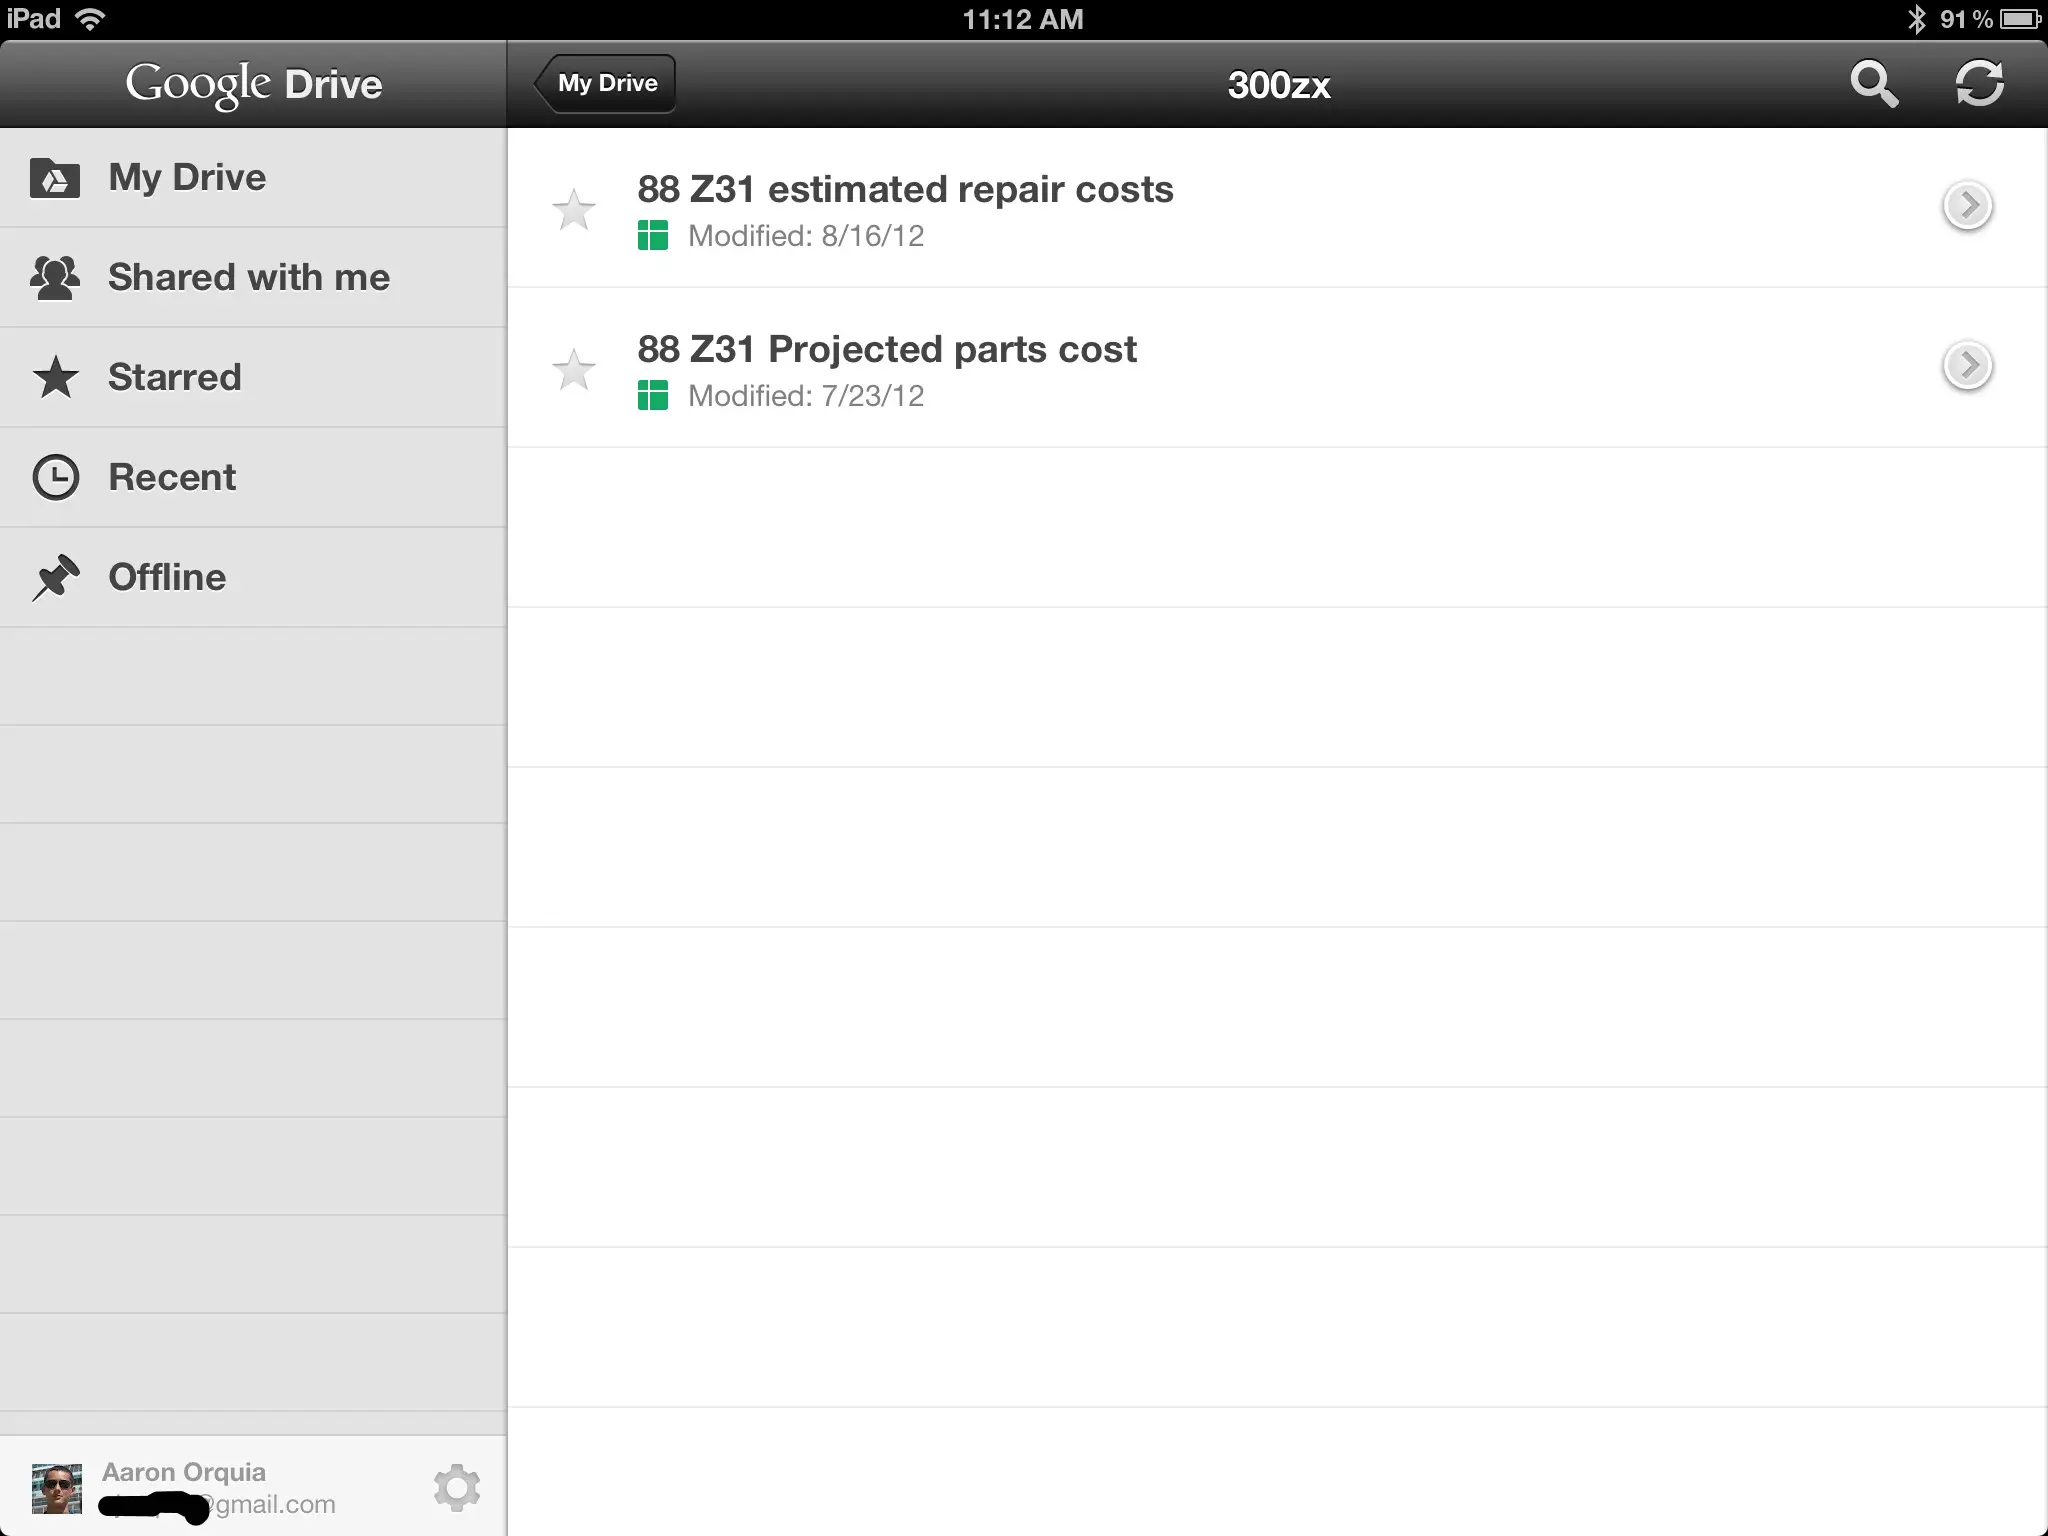 google drive ipad - for some reason we don't have an alt tag here